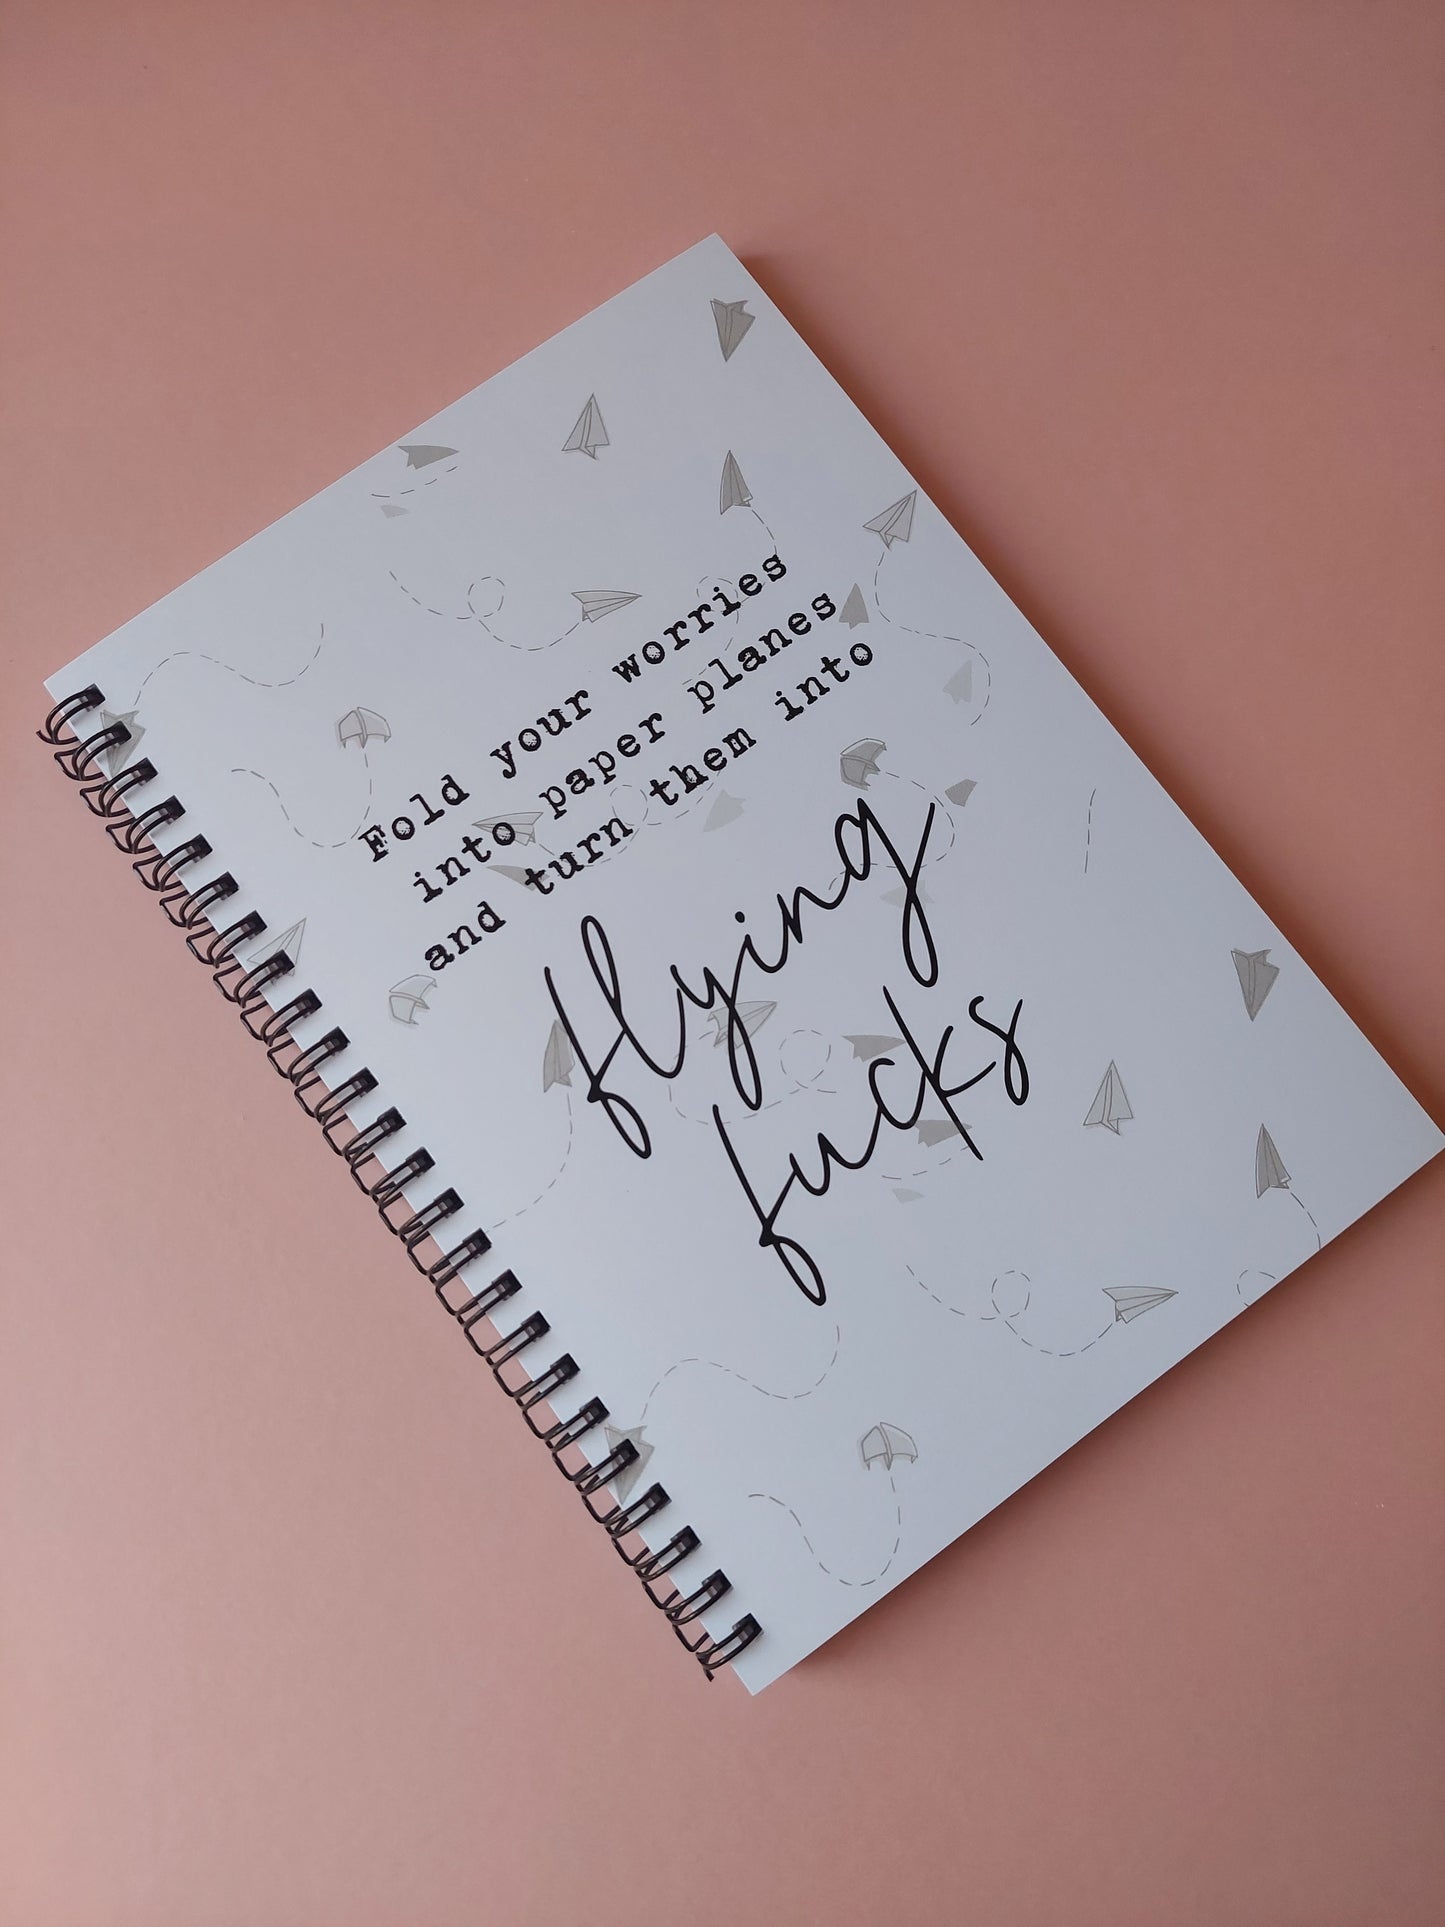 Funny Notebook | Fold Your Worries Into Paper Planes And Turn Them Into Flying Fucks  | Quote Notebook Gift